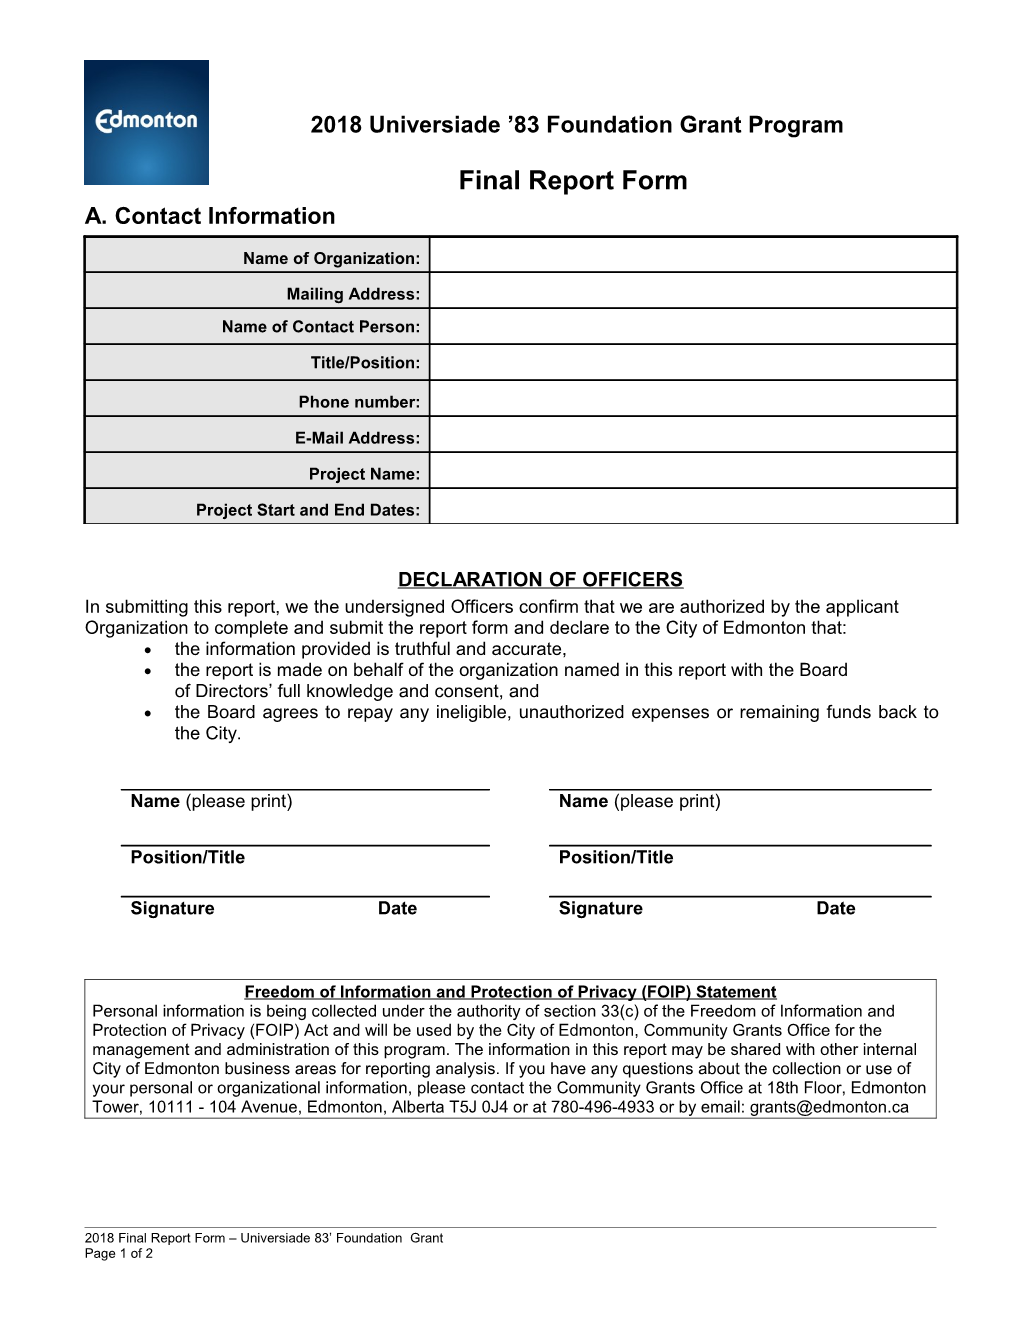 EIRC 2011 Community Based 10K Project Grant Final Report Form